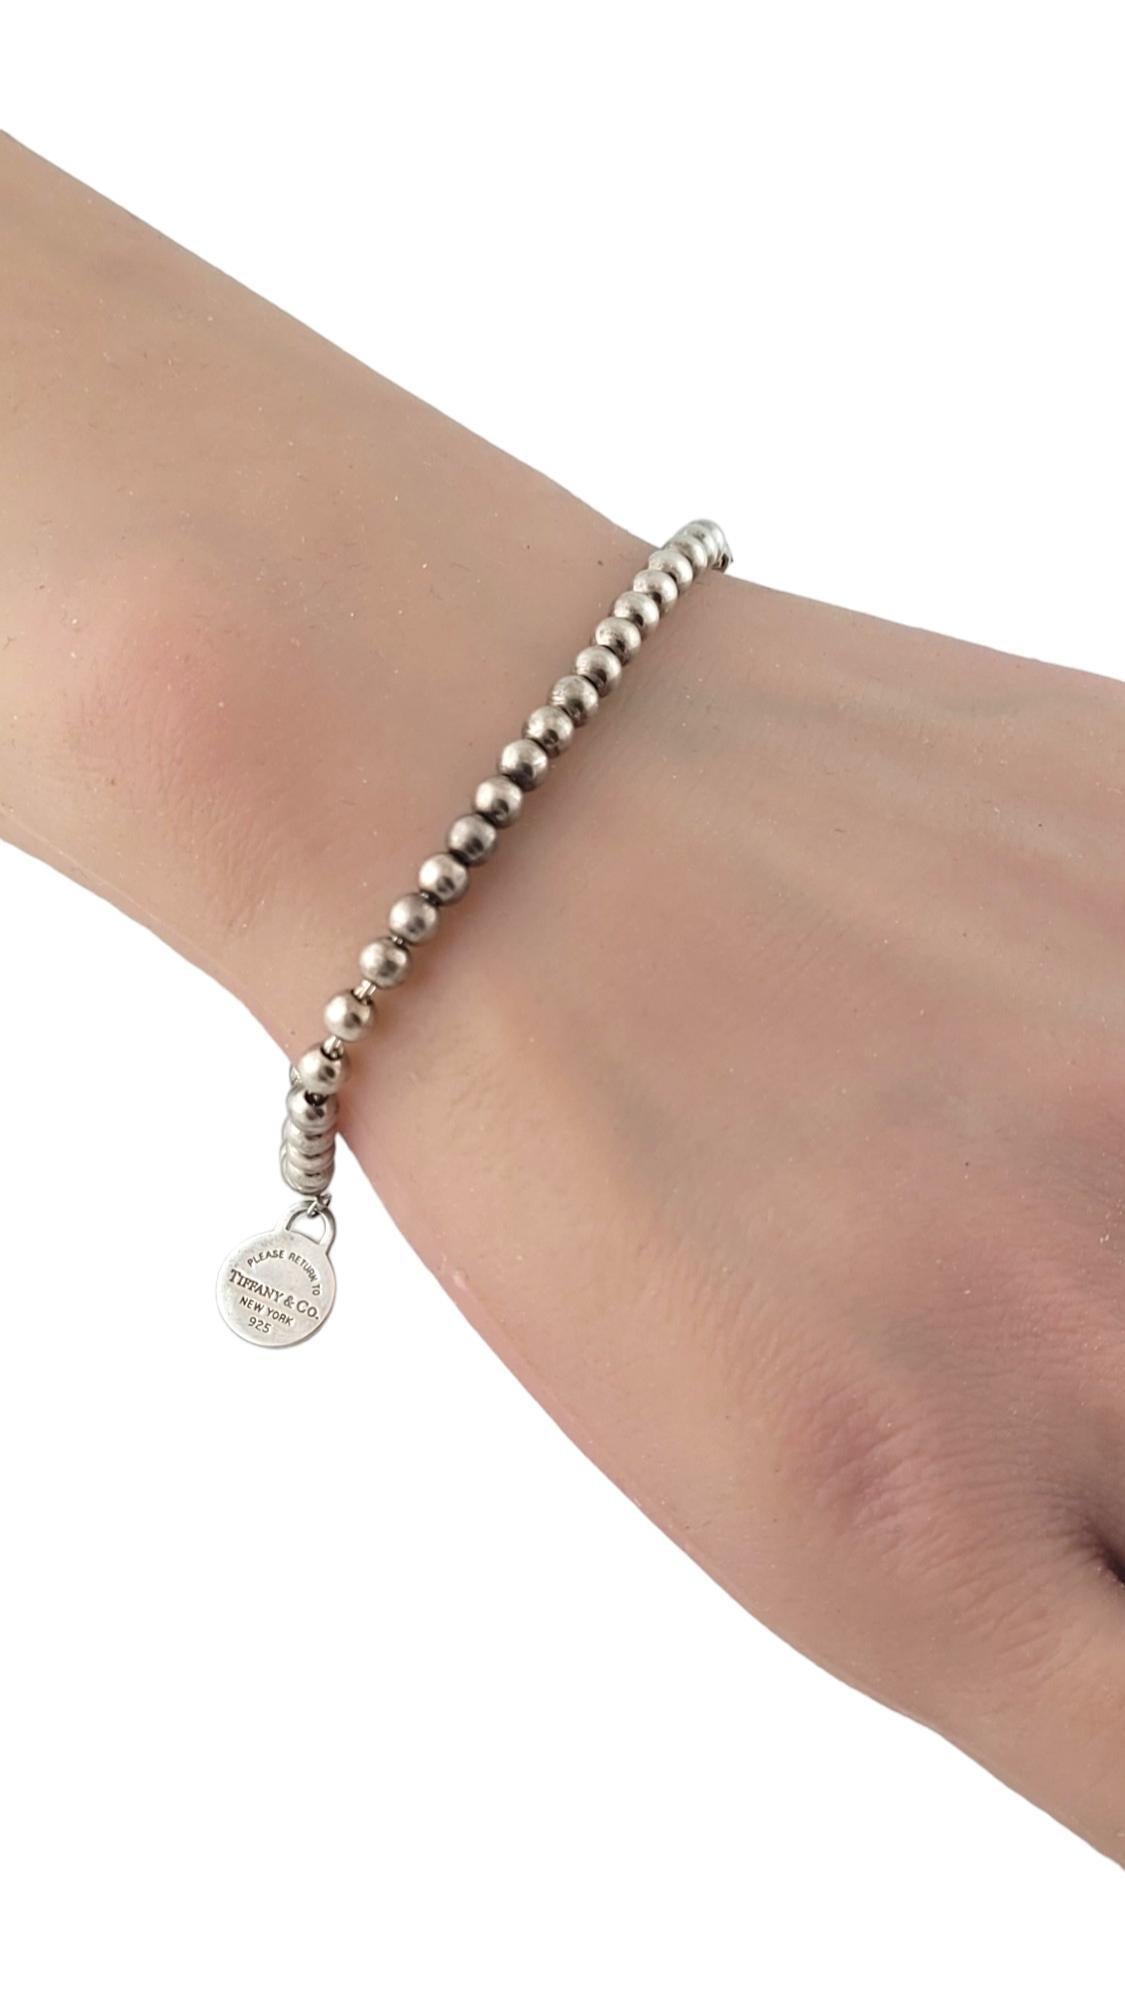 Tiffany & Co. Sterling Silver Return to Tiffany Heart Tag Bead Bracelet #17391 For Sale 3